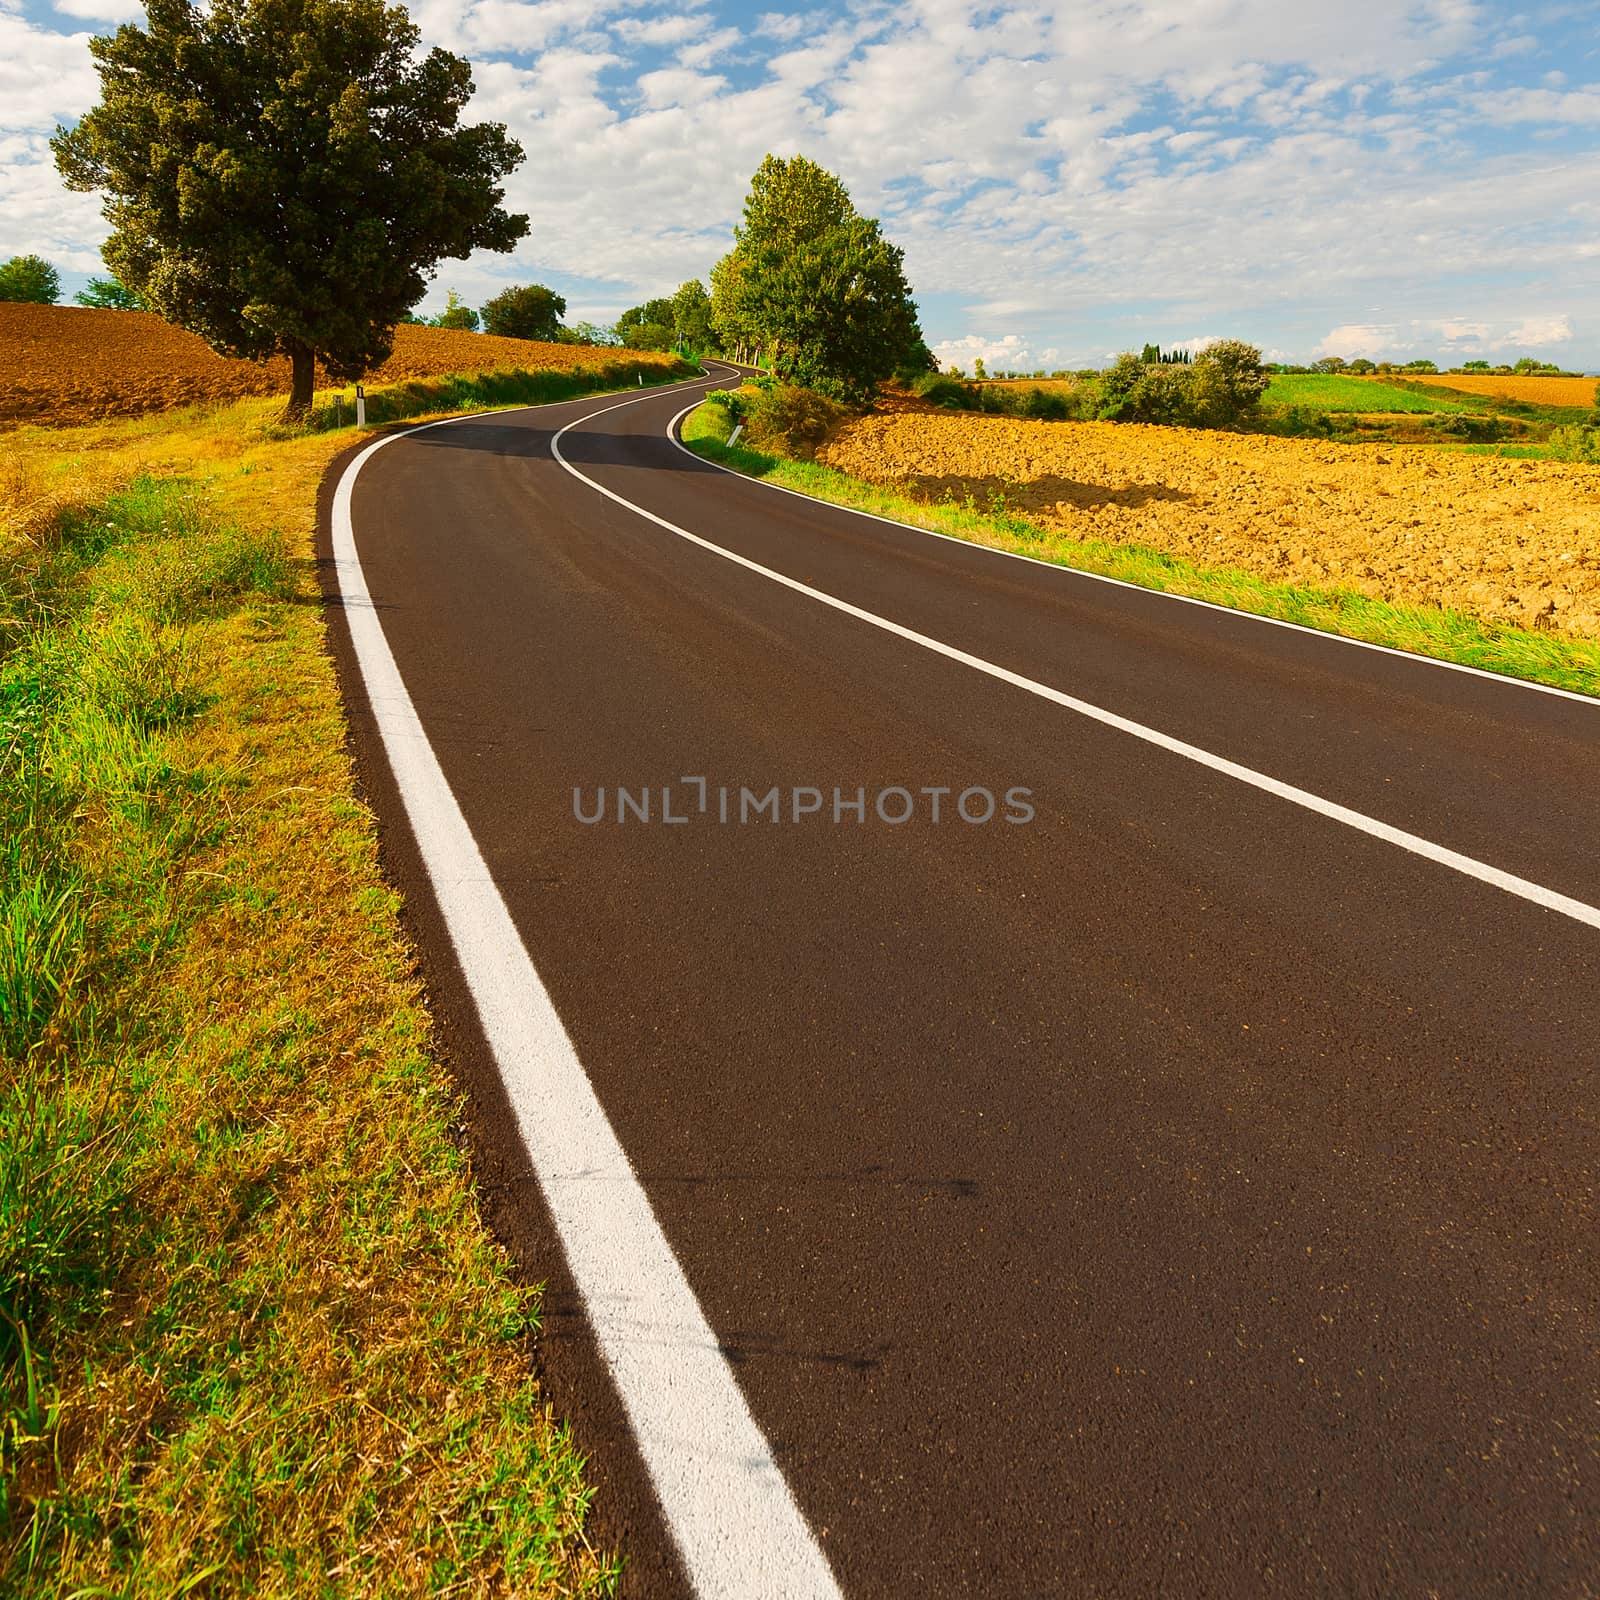 Winding Asphalt Road between Autumn Plowed Fields in the Tuscany